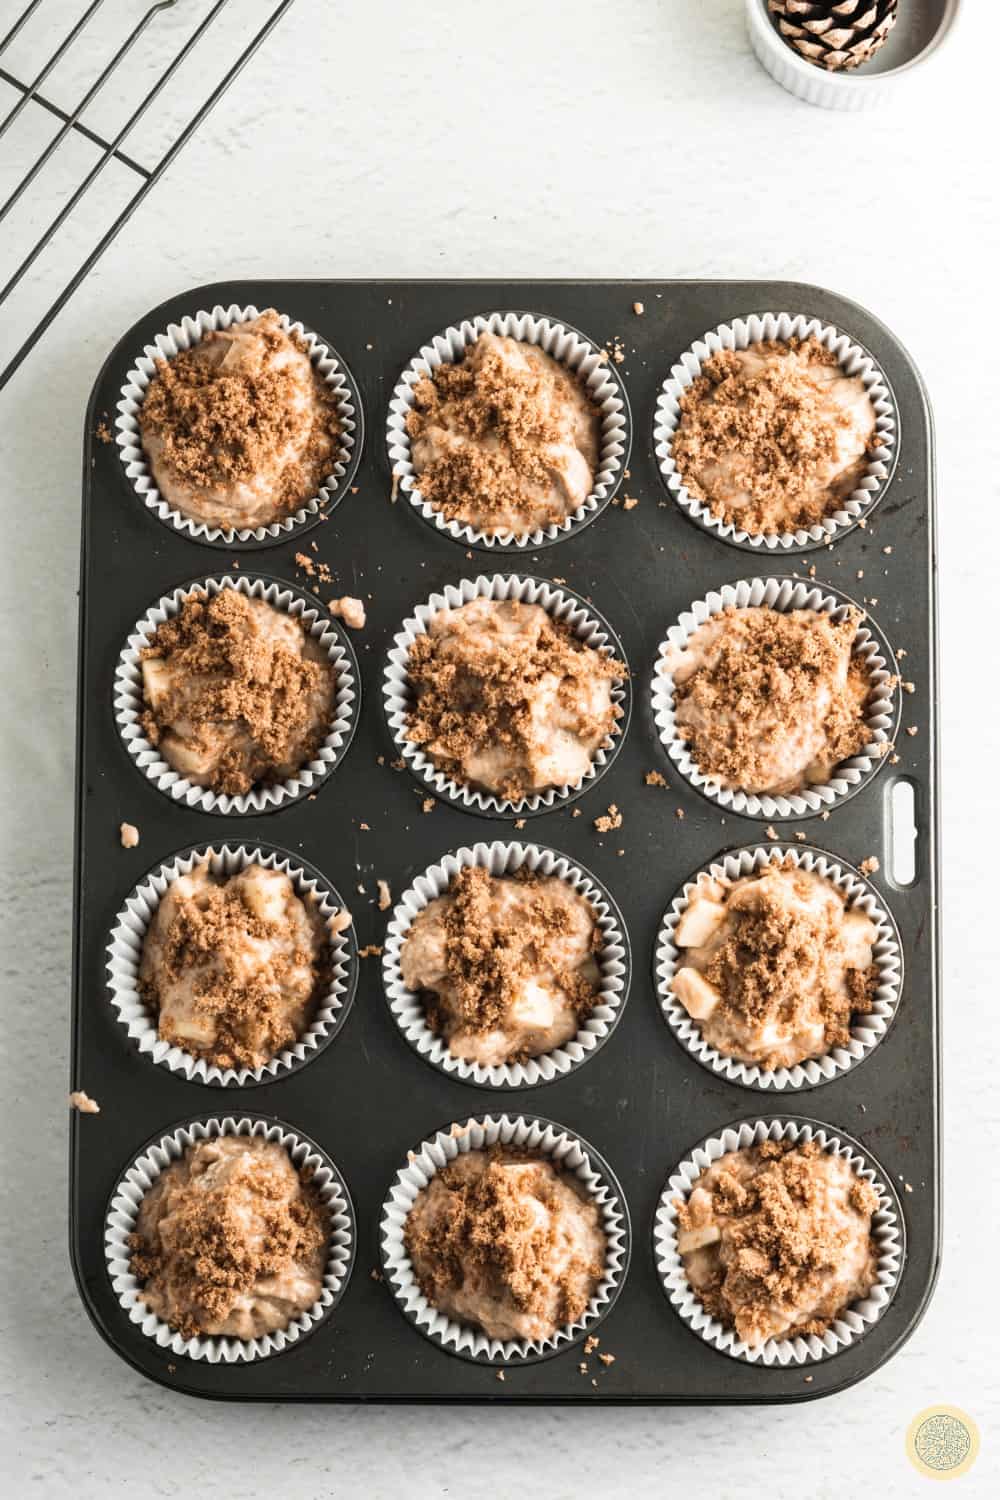 Divide the batter between 12 muffin cups